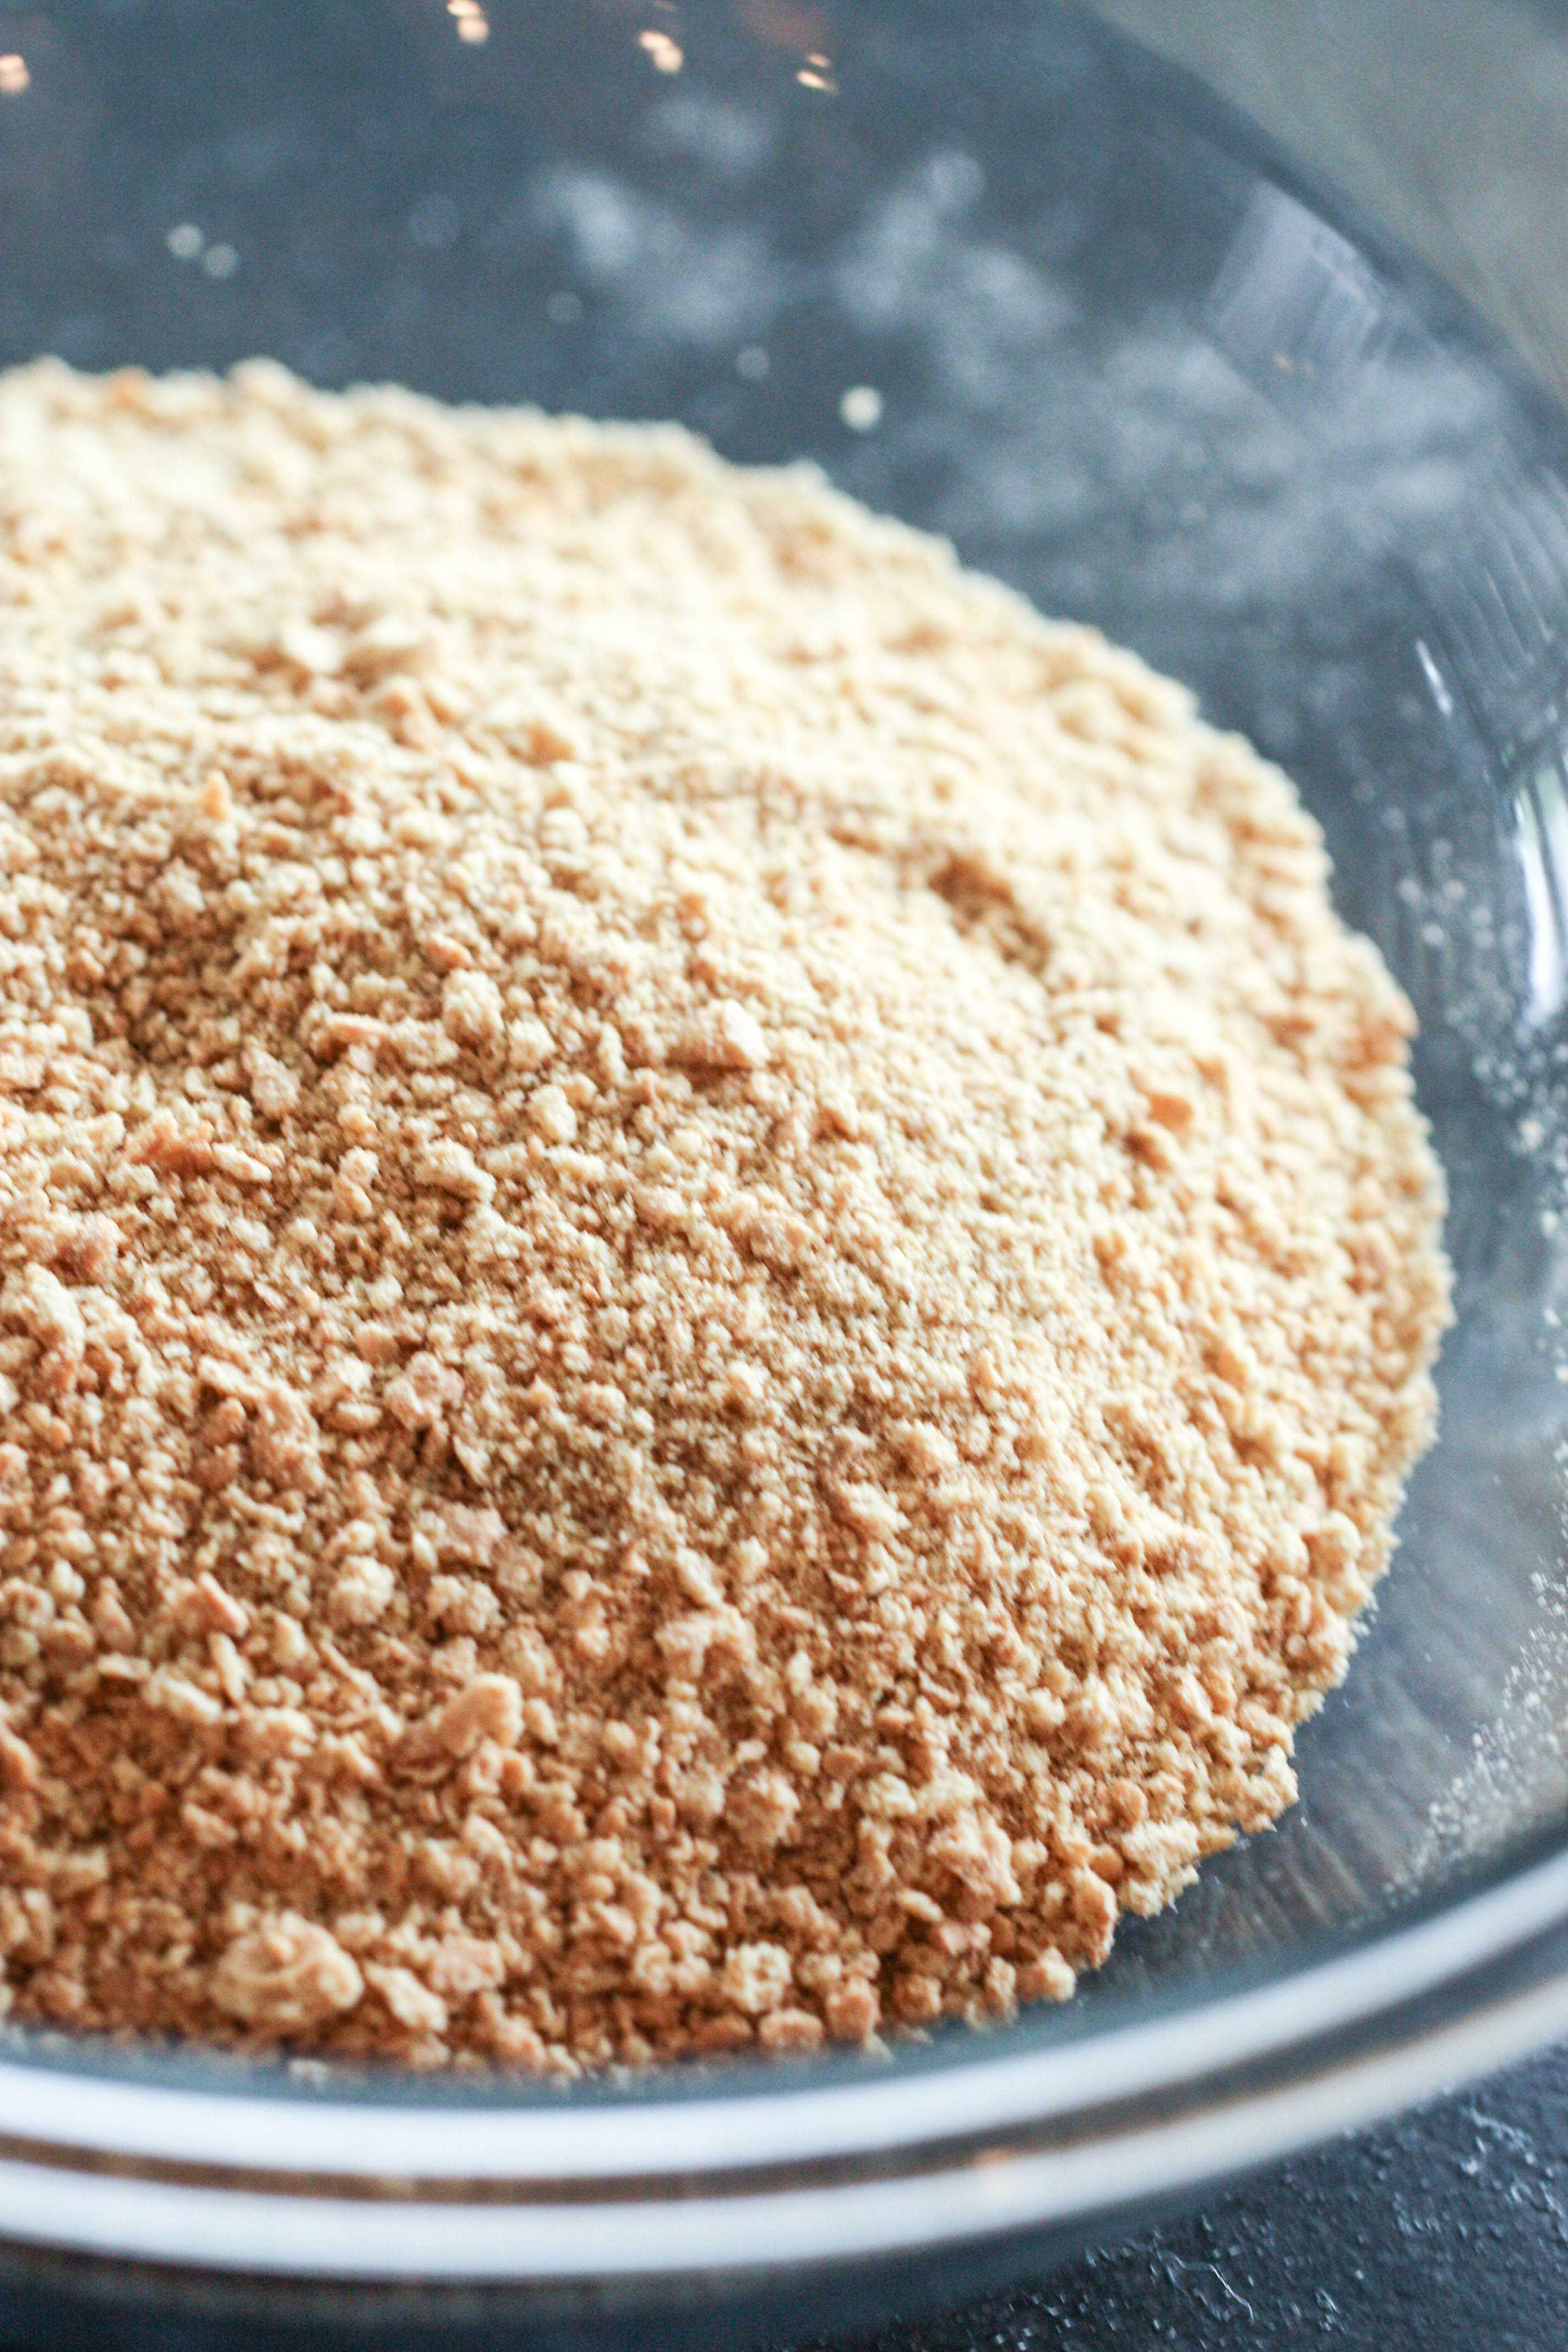 Graham cracker crumbs in a mixing bowl